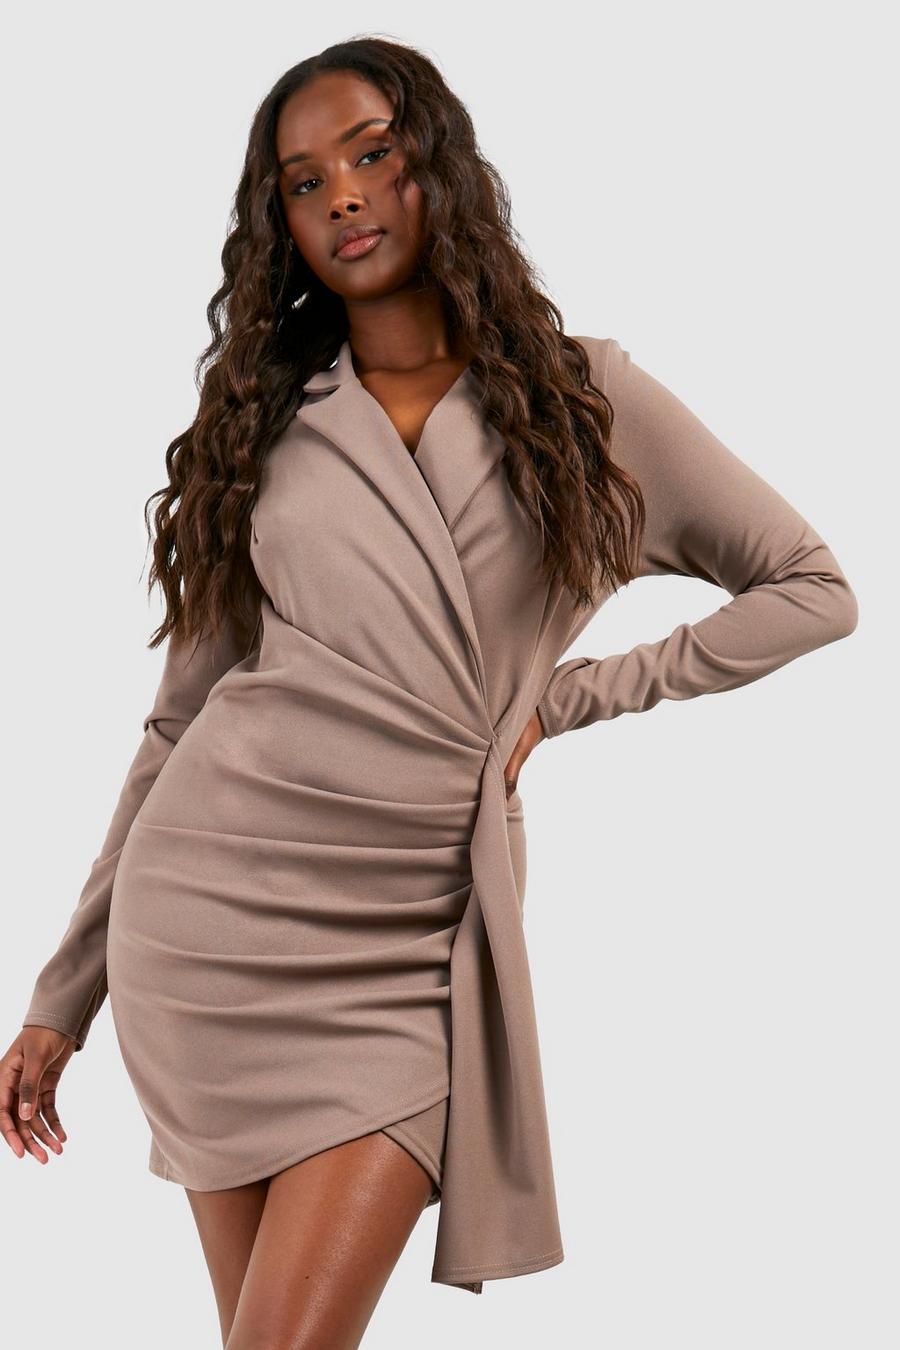 Women Solid Long Sleeve with Glove and Shoulder Pad Deep V Neck Sheath  Asymmetrical Plus Size Dress Size 18